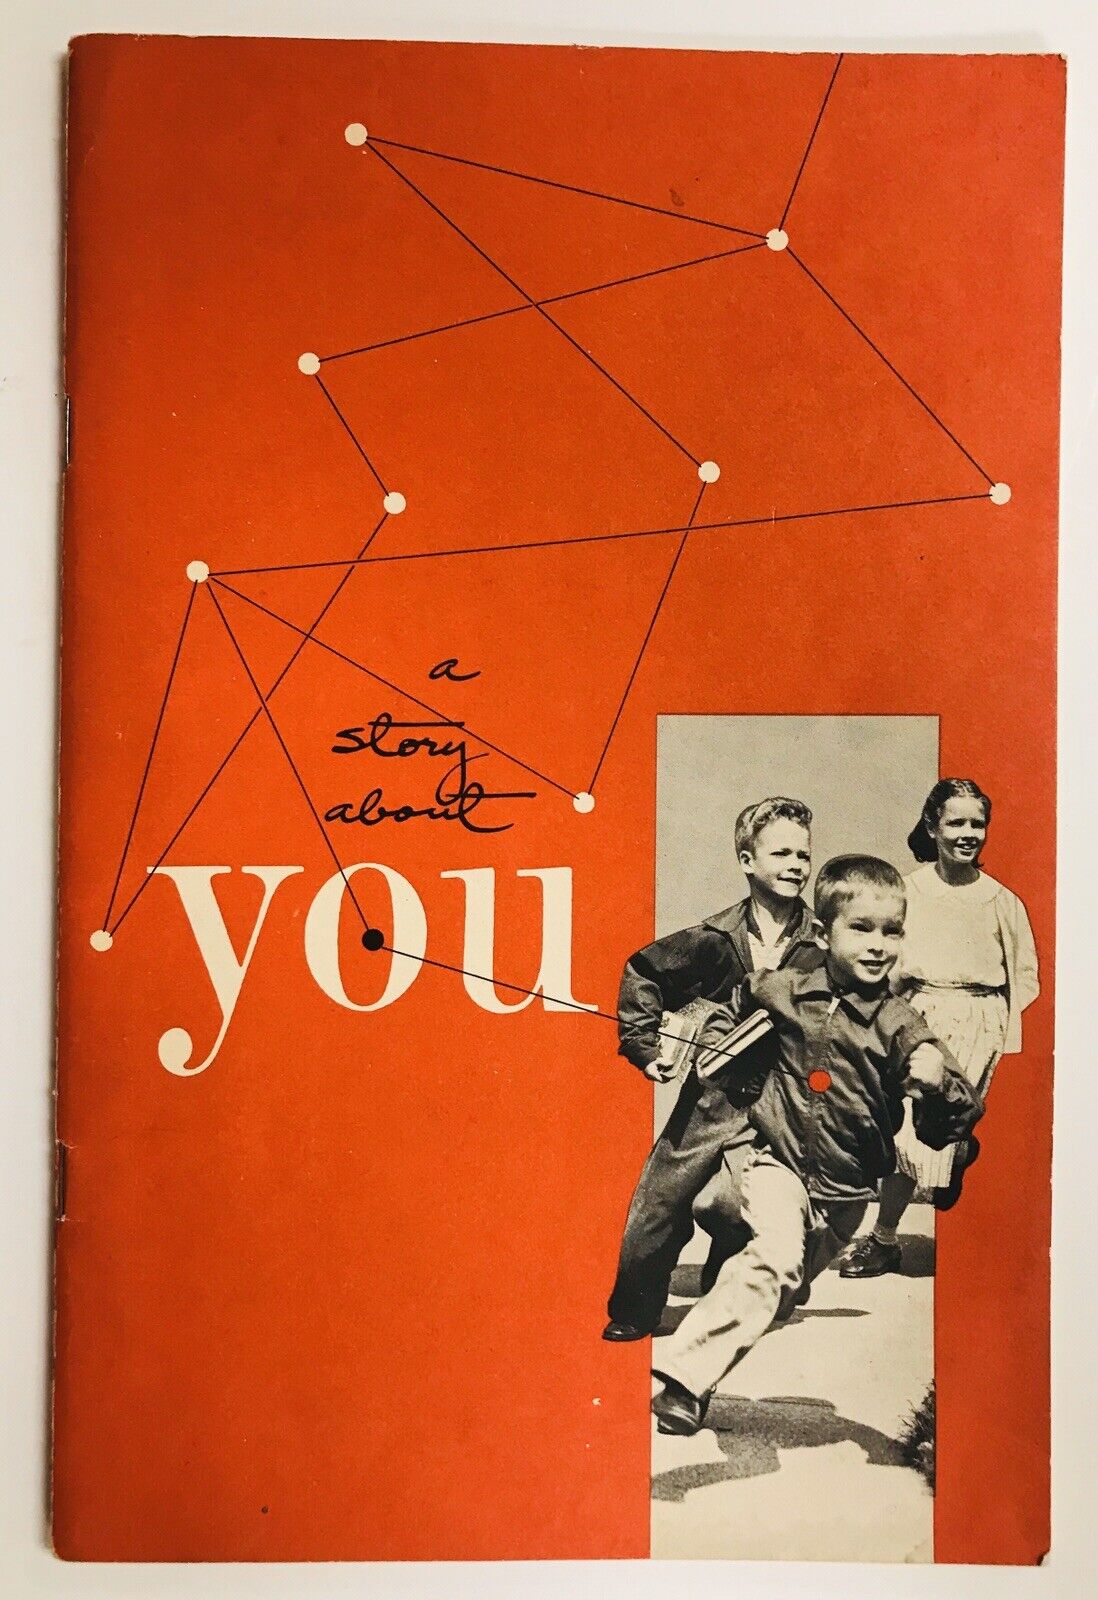 A Story About You 1962 Vintage Sex Ed American Medical Association SC